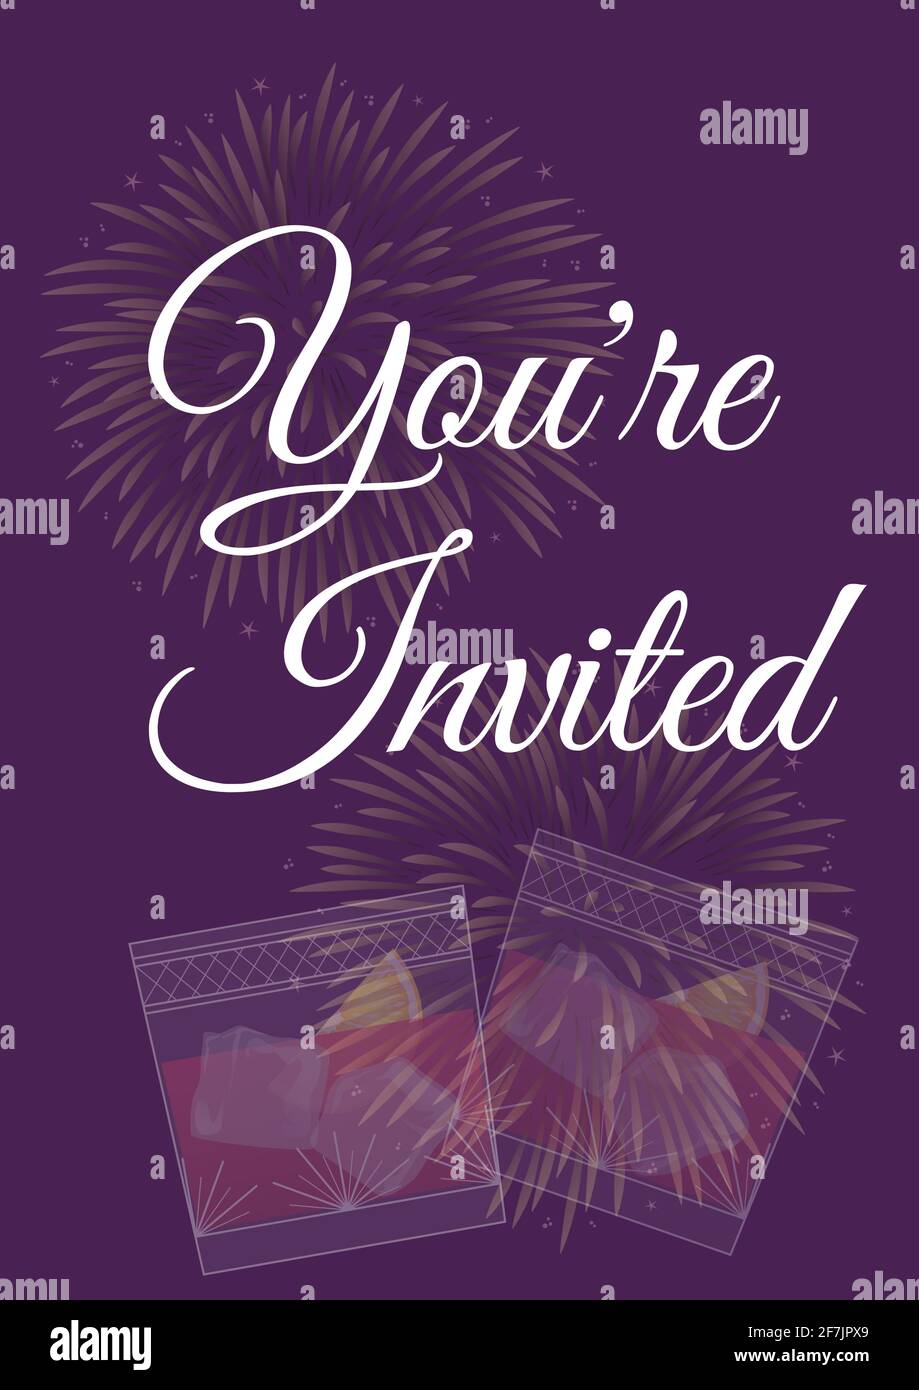 You're invited written in white with pale fireworks and two drinks on invite with purple background Stock Photo